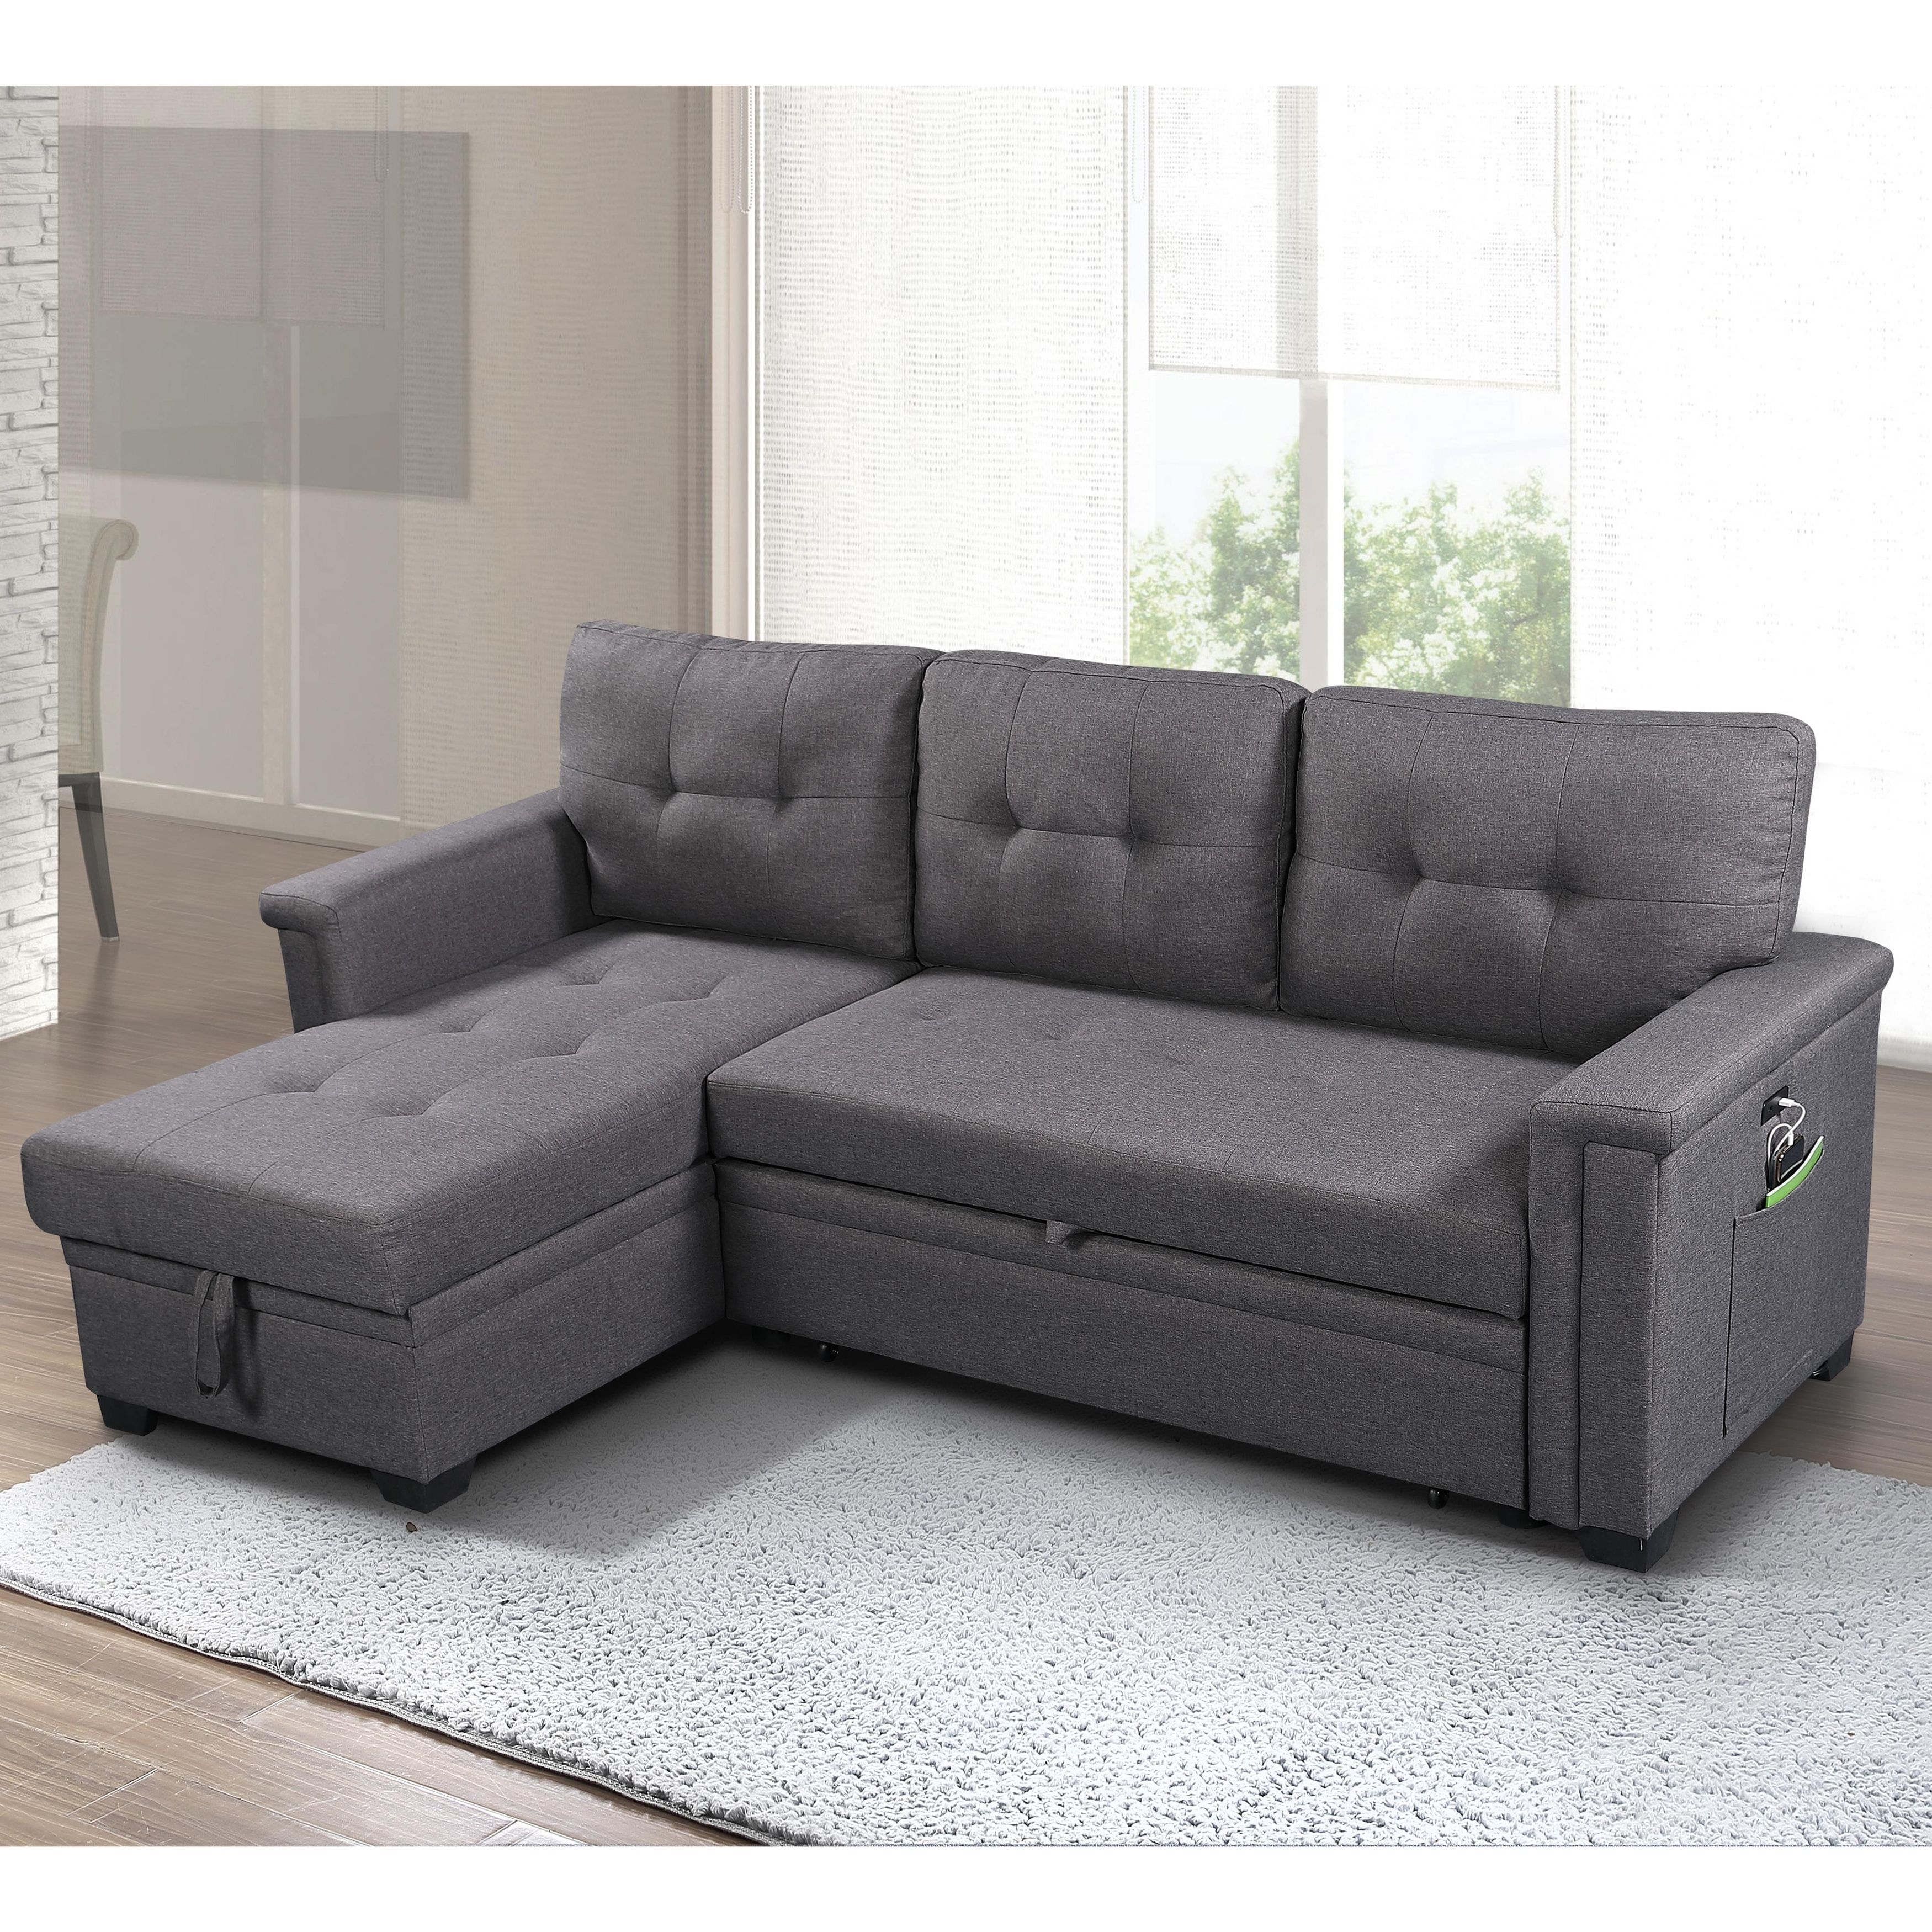 Ashlyn Reversible Sleeper Sofa With Storage Chaise – On Sale – – 30144937 Inside Convertible Sofas With Matching Chaise (Gallery 6 of 20)